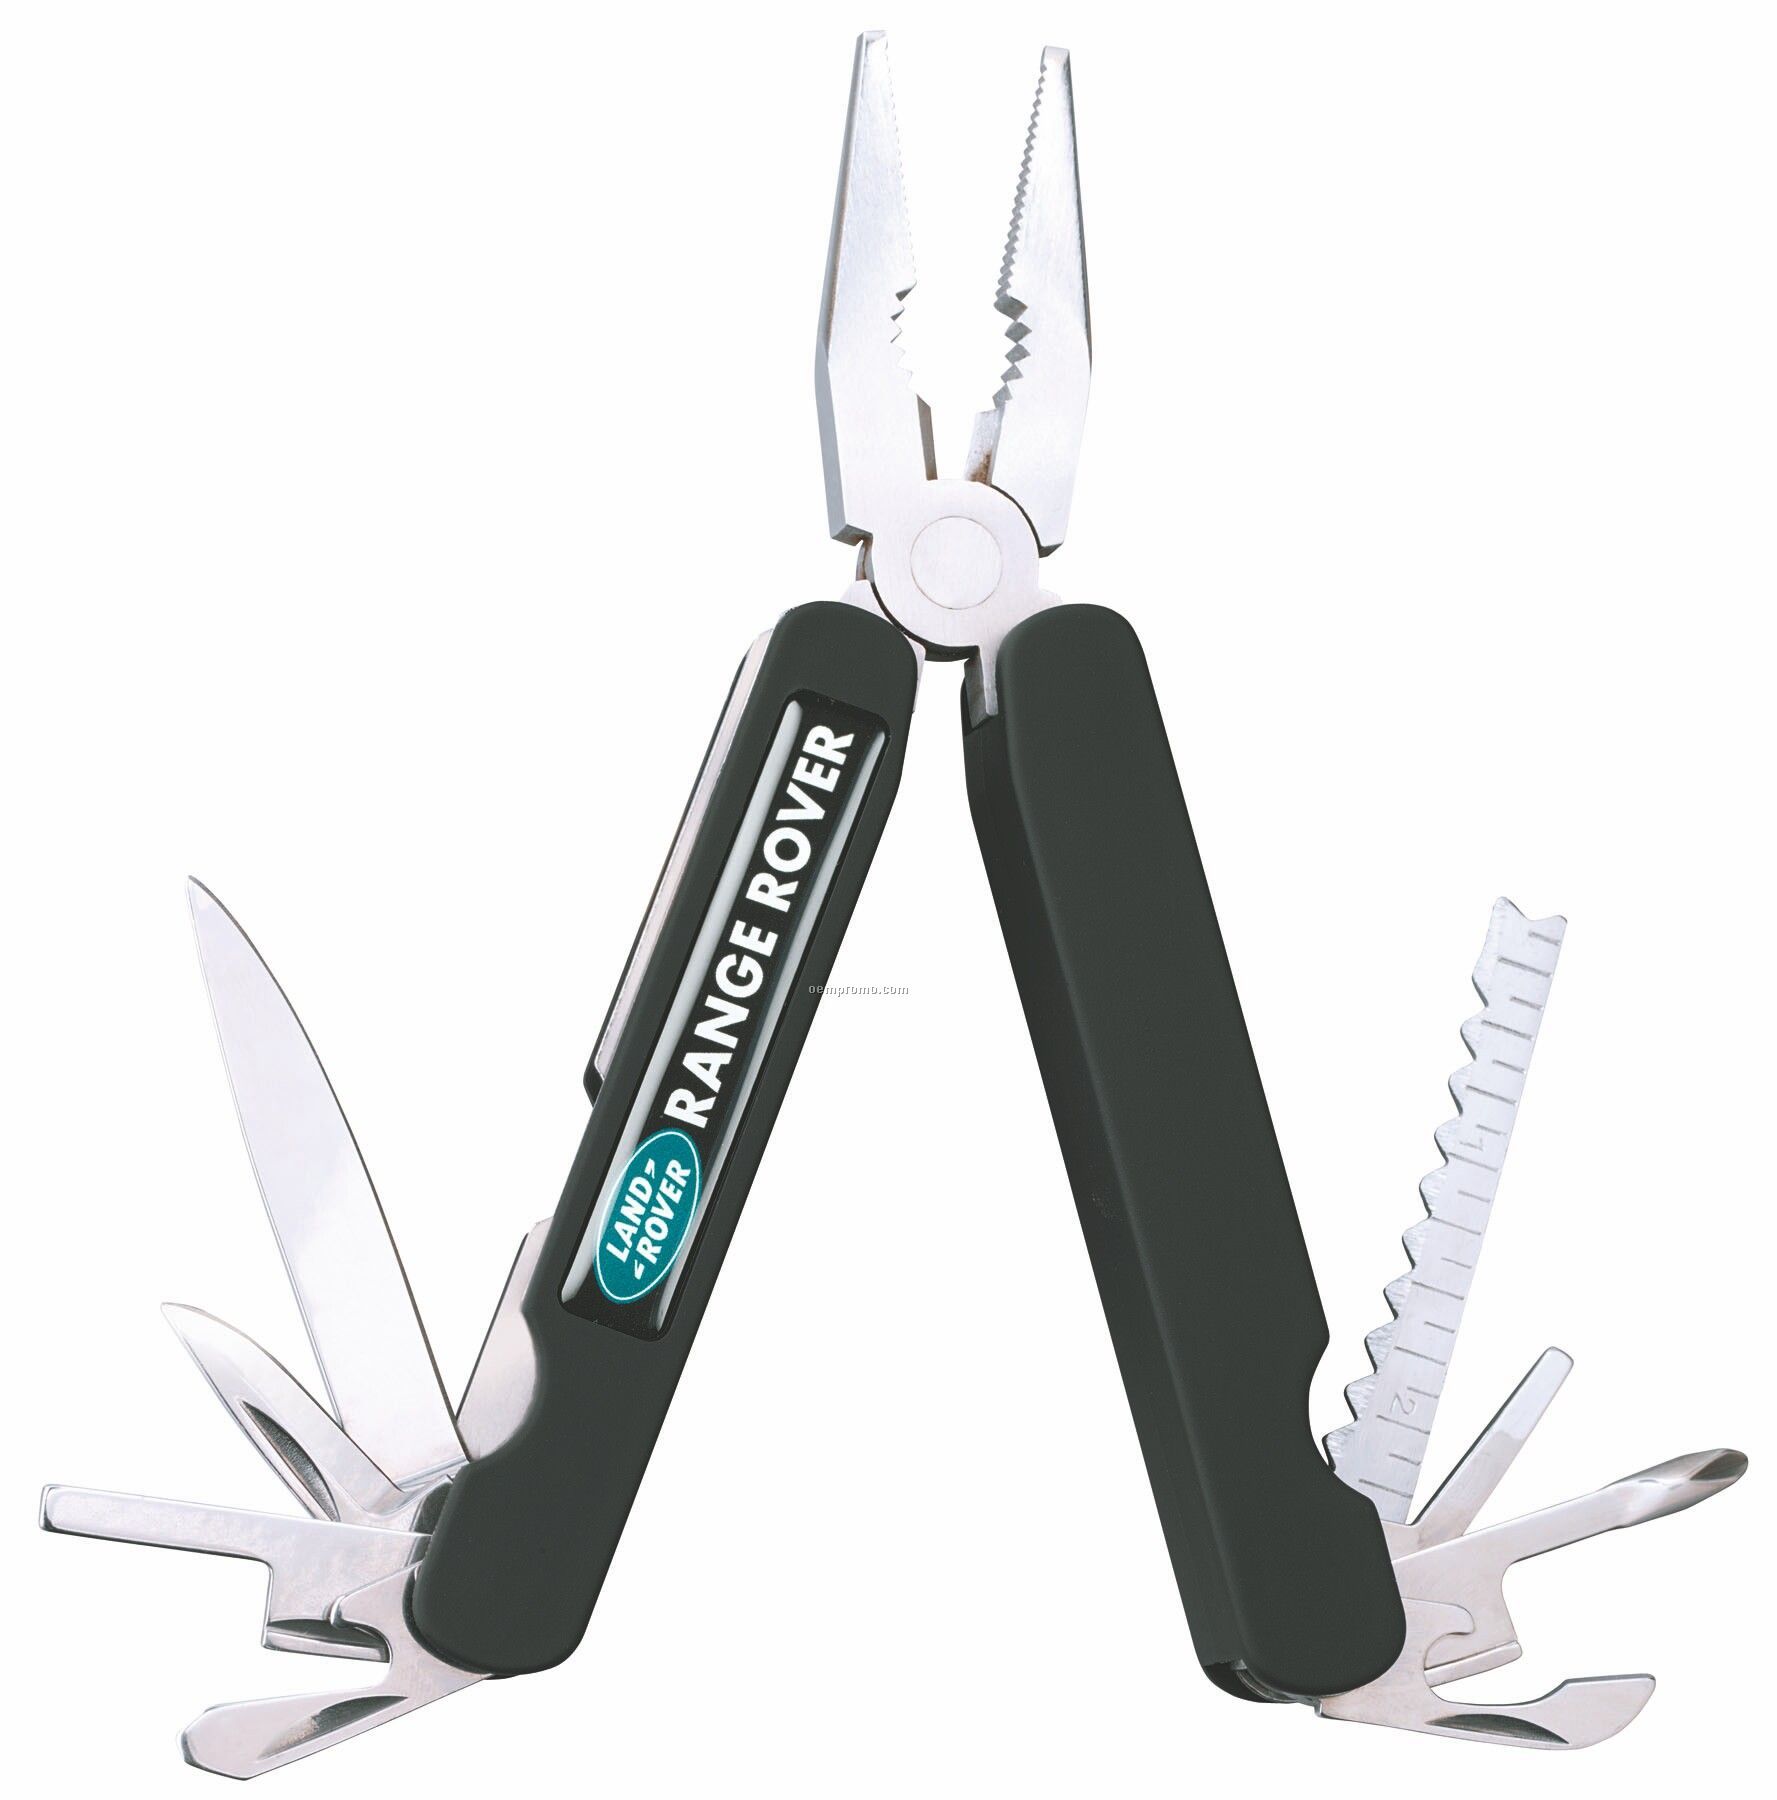 Expedition Multi-tool W/ Screwdriver, Opener, Knife, Ruler